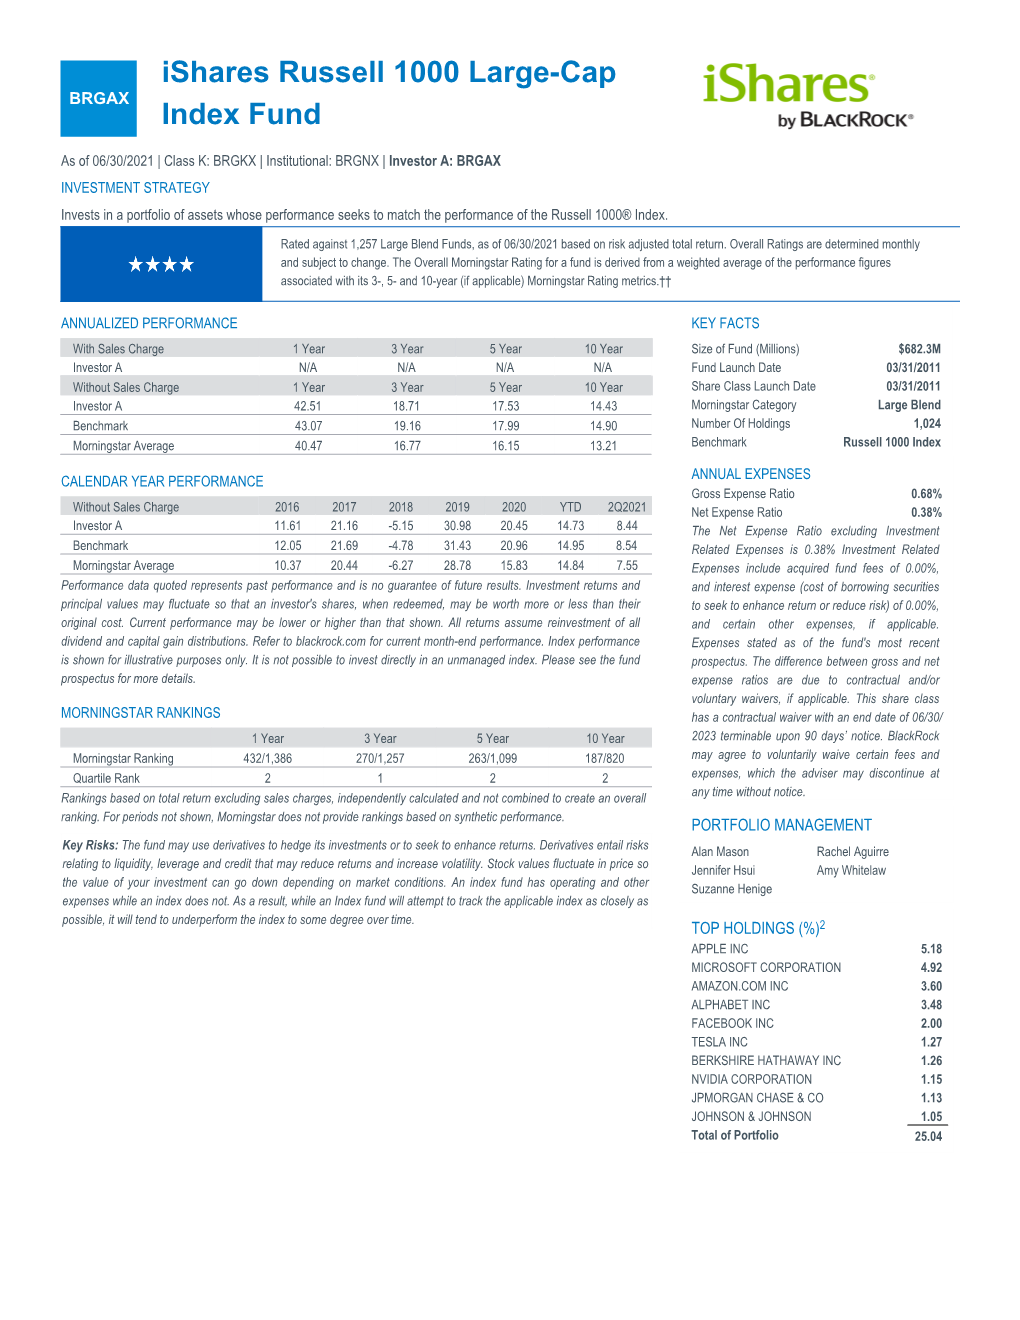 Ishares Russell 1000 Large-Cap Index Fund BRGAX Investor a As of 30-Jun-2021